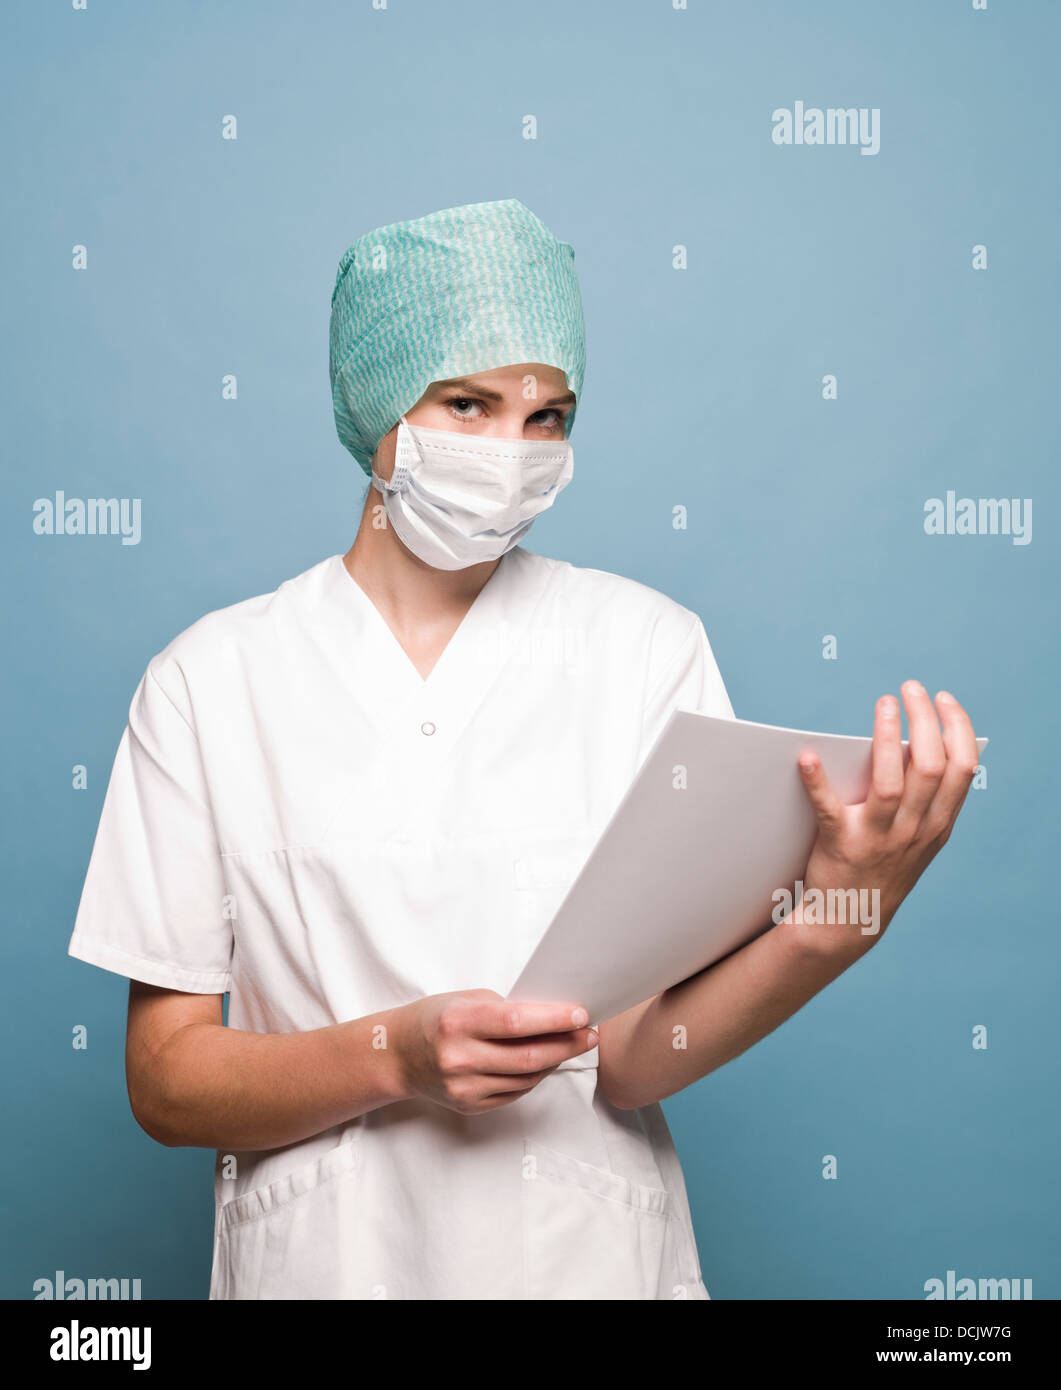 Nurse with surgical mask and a journal facing the camera Stock Photo